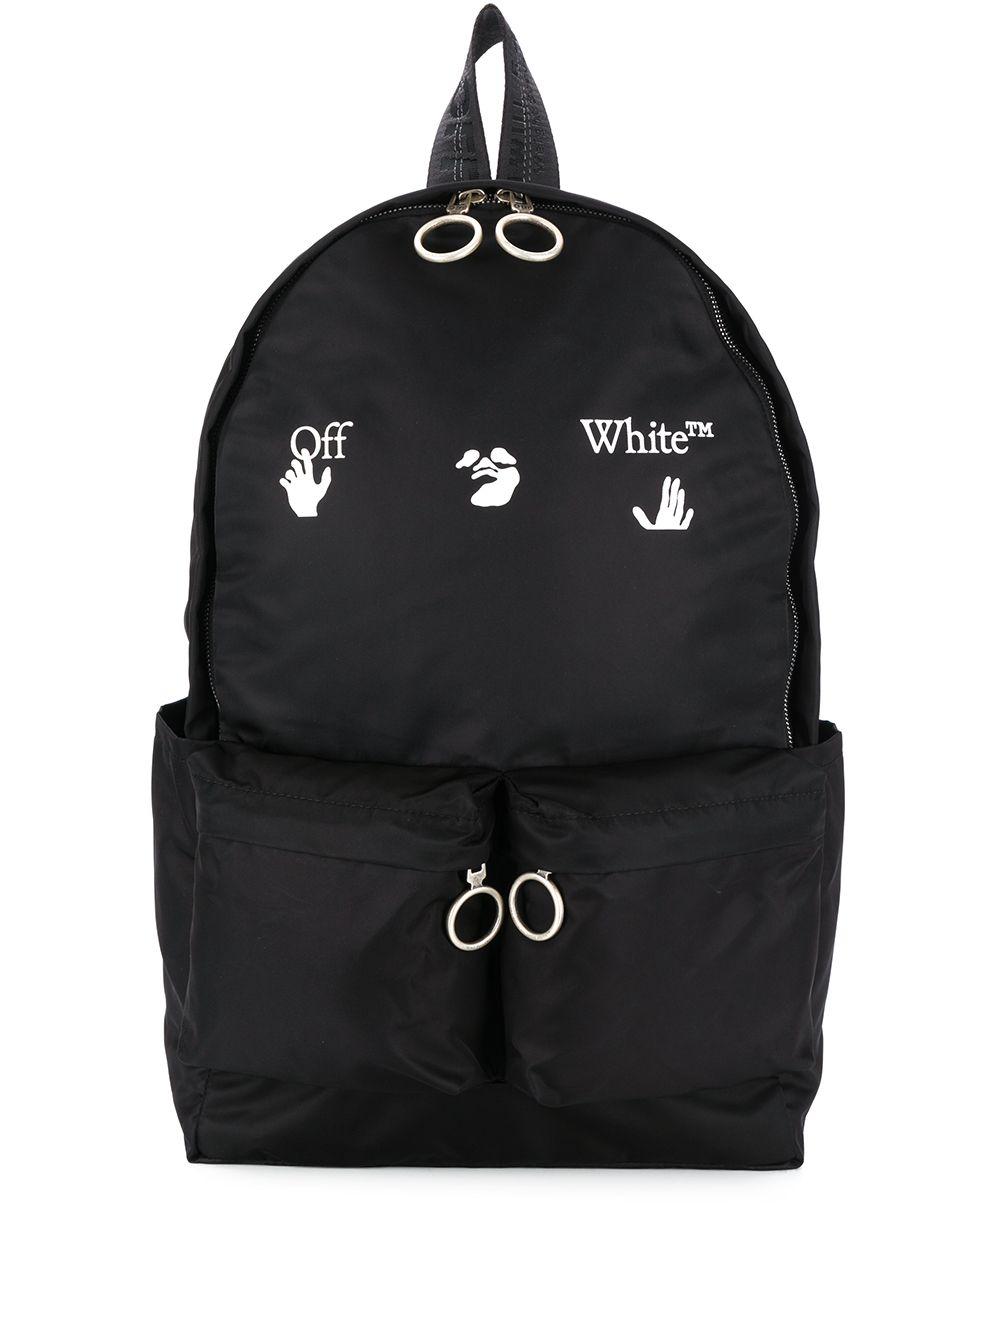 Off-White c/o Virgil Abloh Cotton Quote Backpack in Black for Men - Lyst